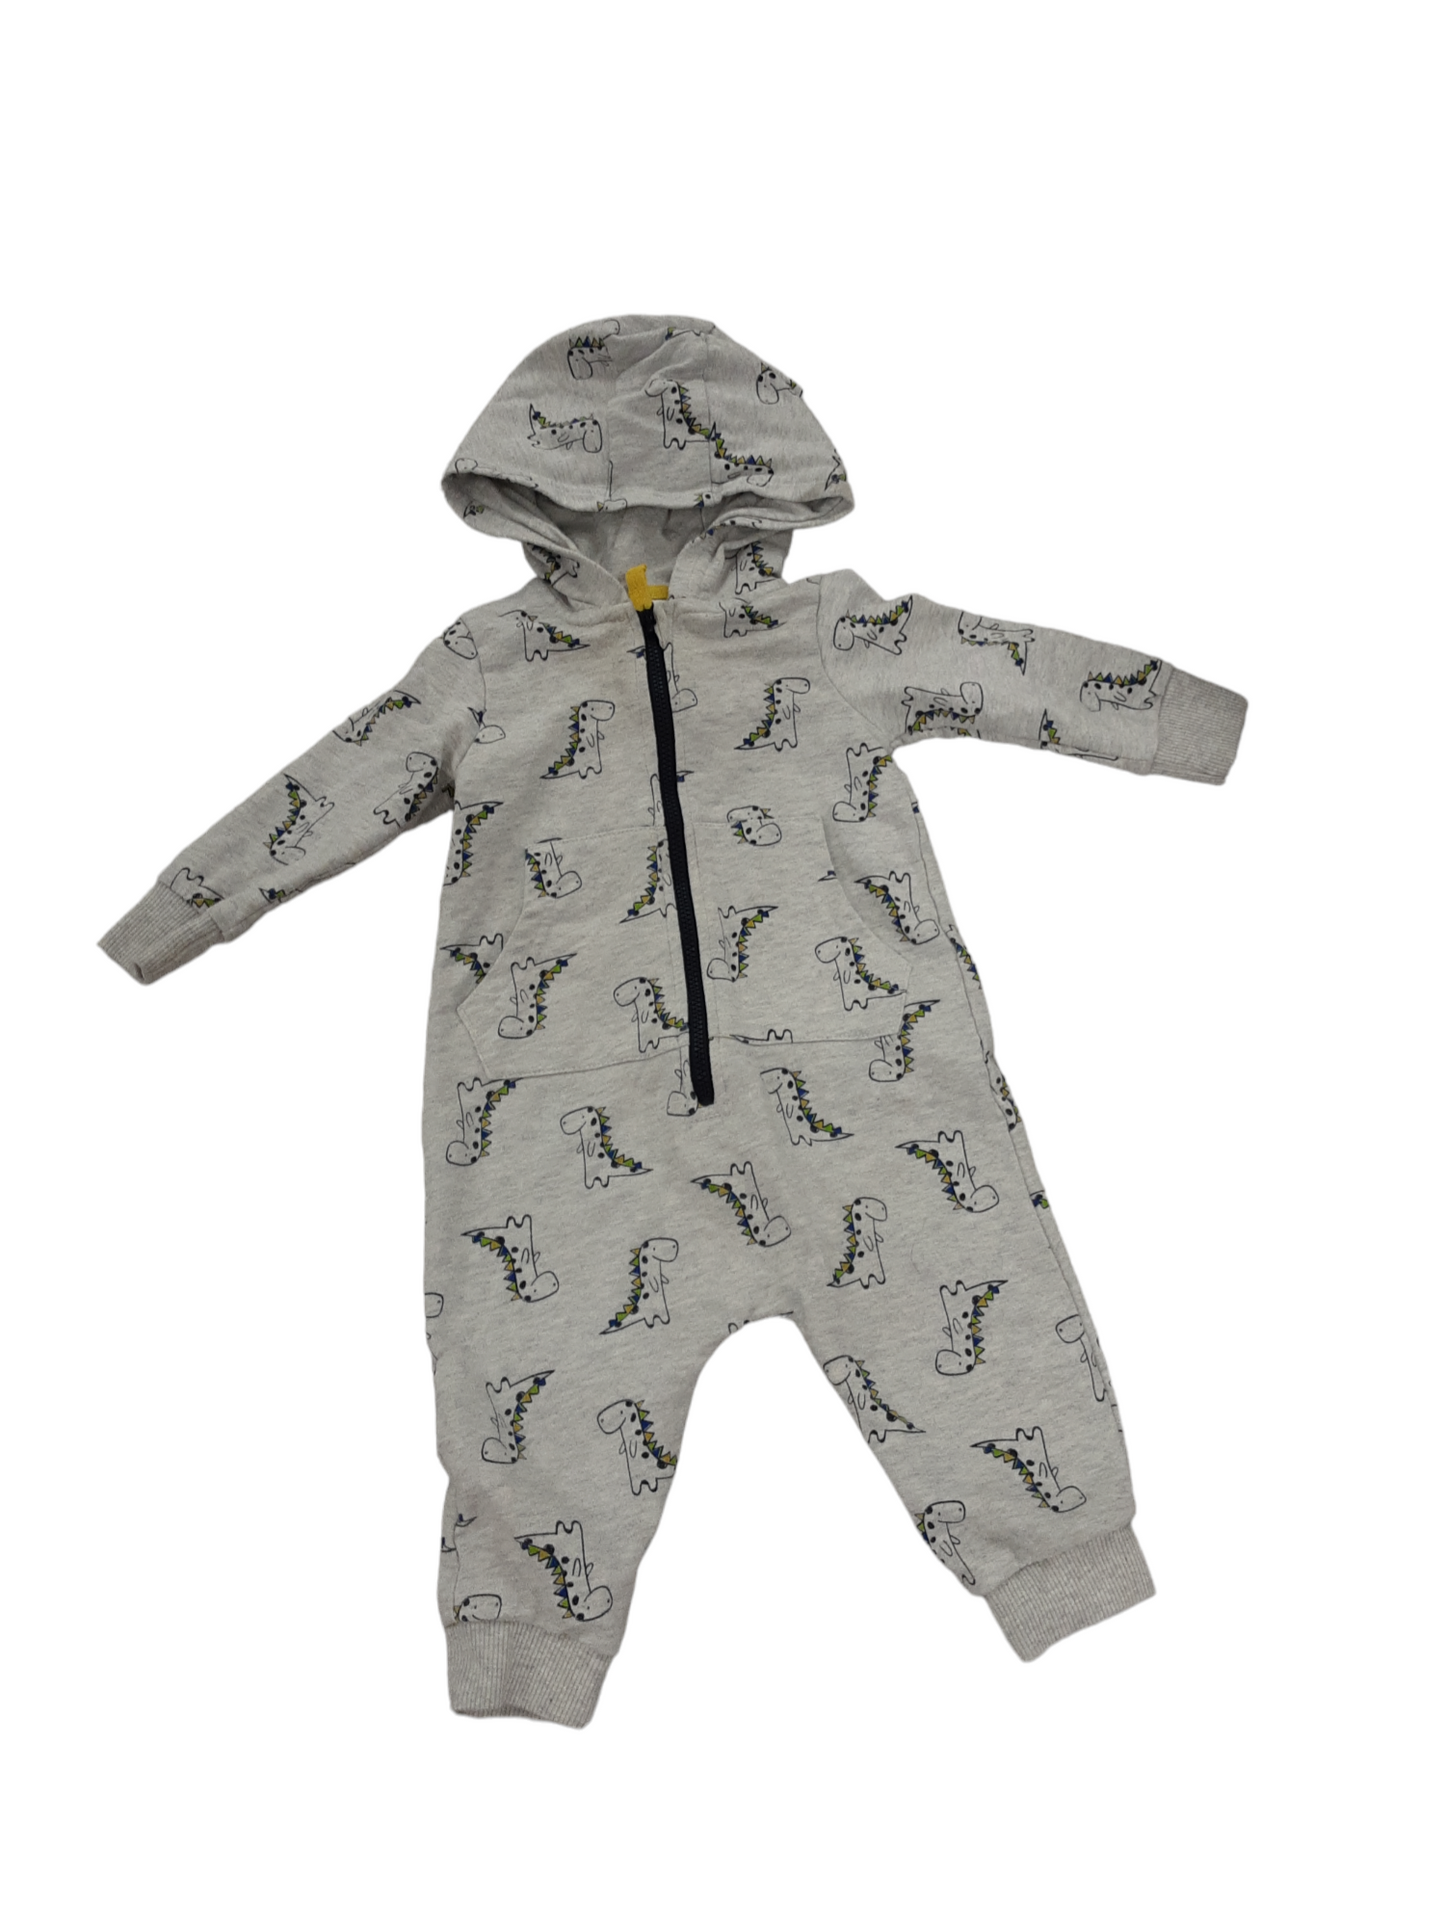 Dino 1 piece size 6 to 12 months